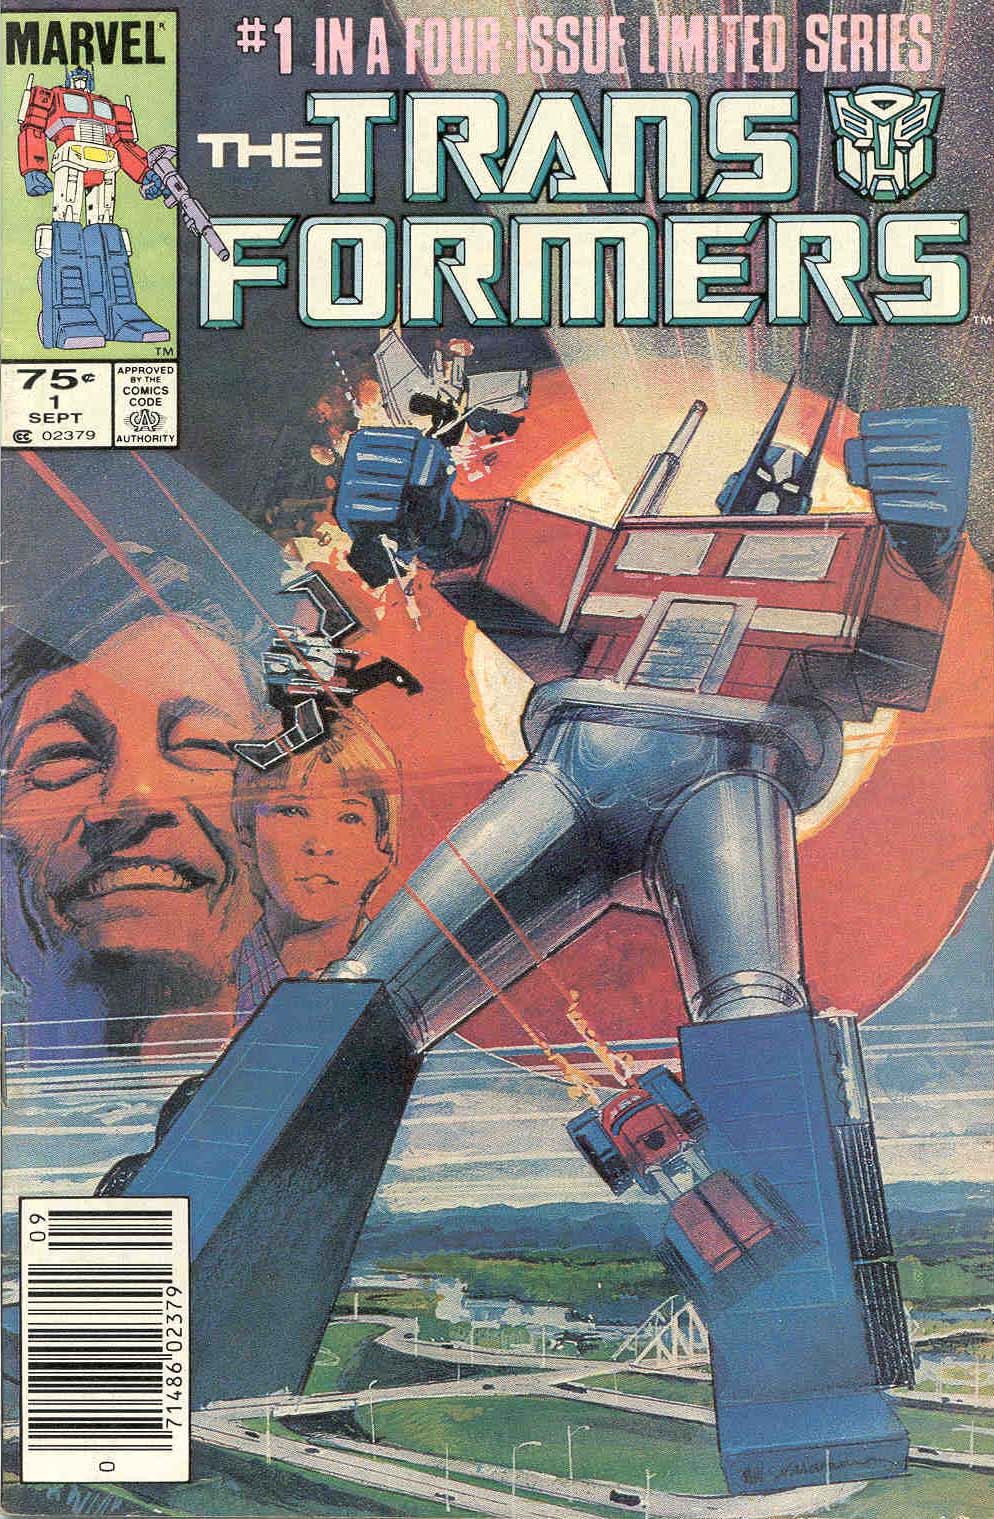 The cover to Transformers #1